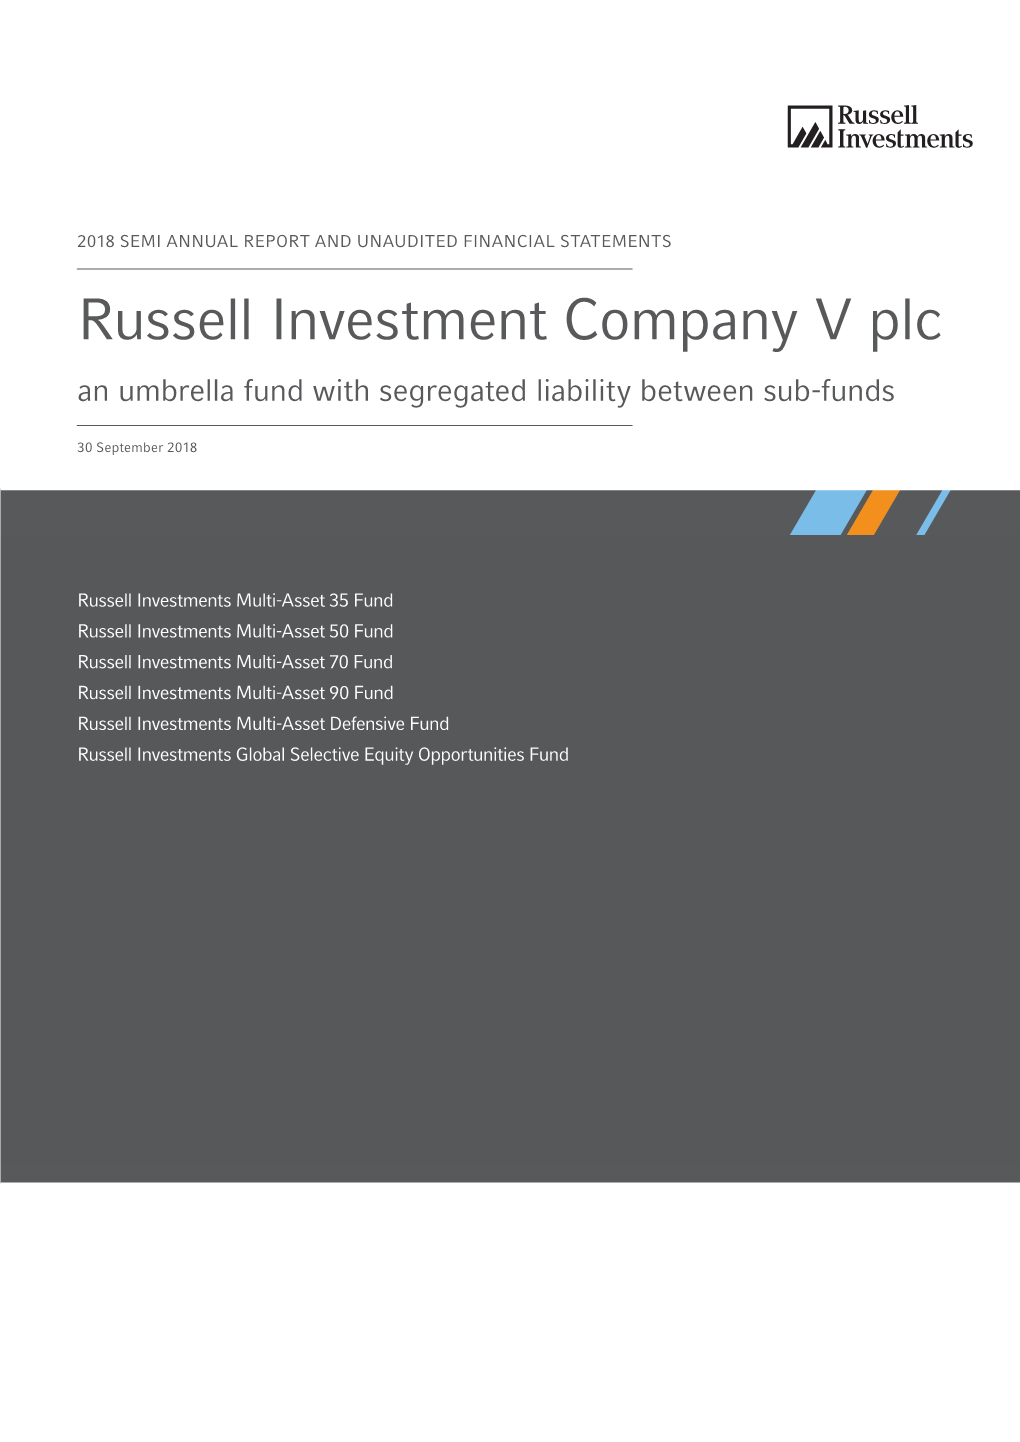 Russell Investment Company V Plc an Umbrella Fund with Segregated Liability Between Sub-Funds